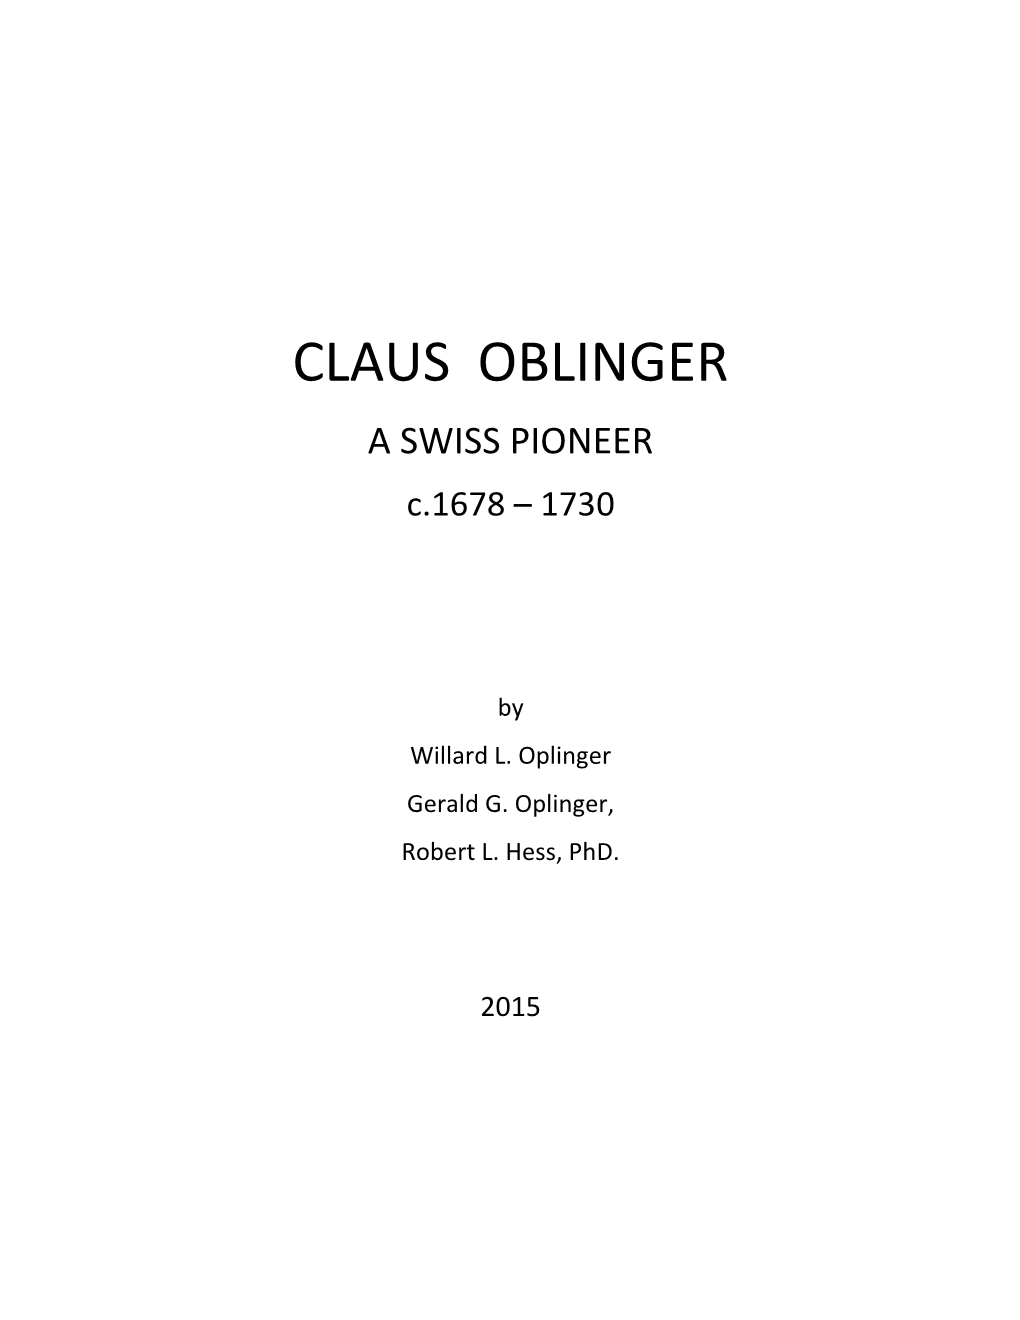 CLAUS OBLINGER a SWISS PIONEER C.1678 – 1730